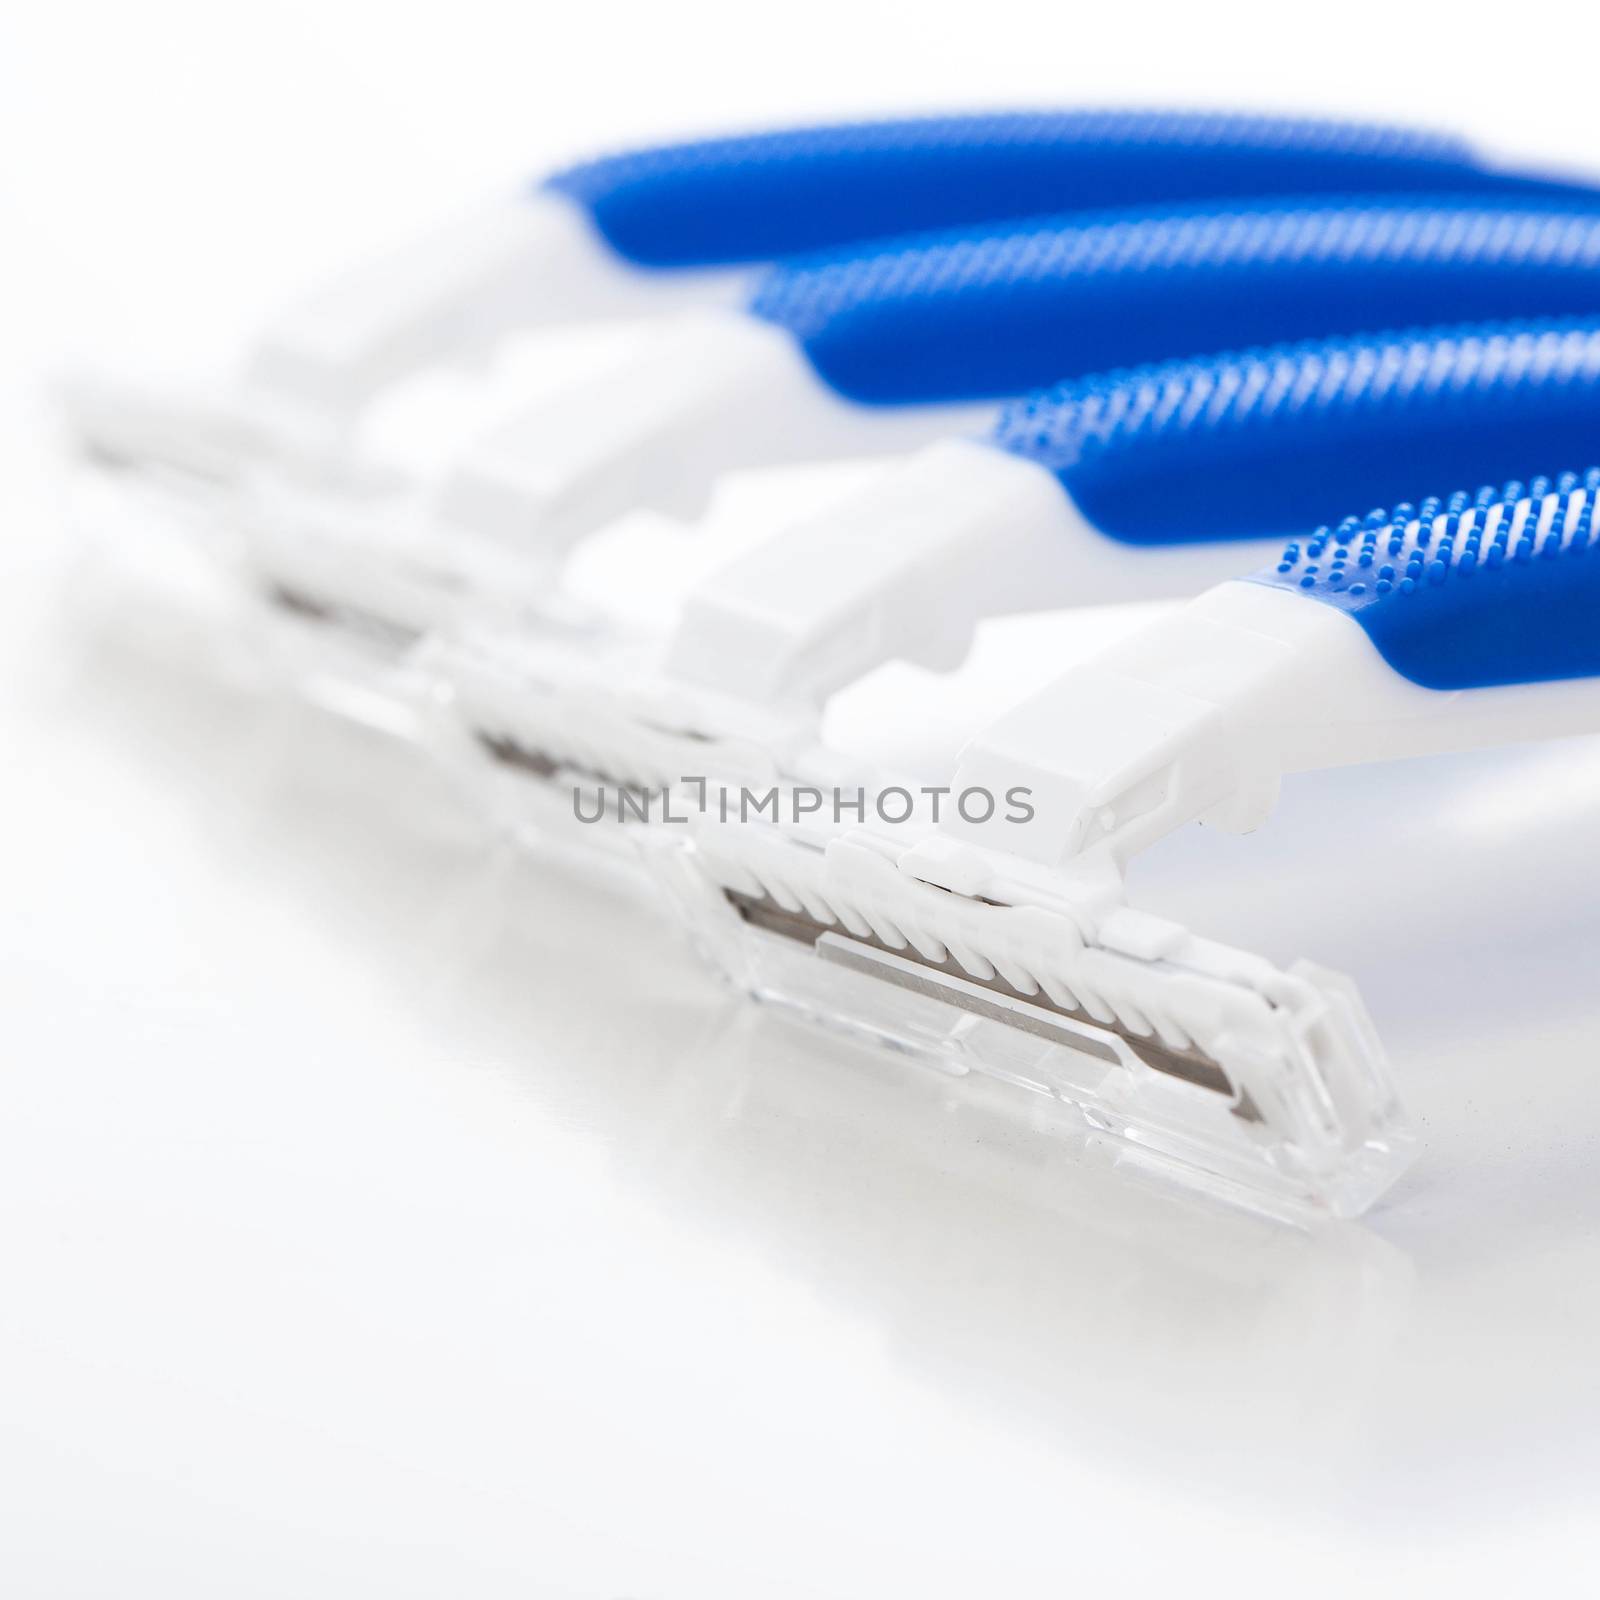 Picture of a few white and blue razors for men over a white background